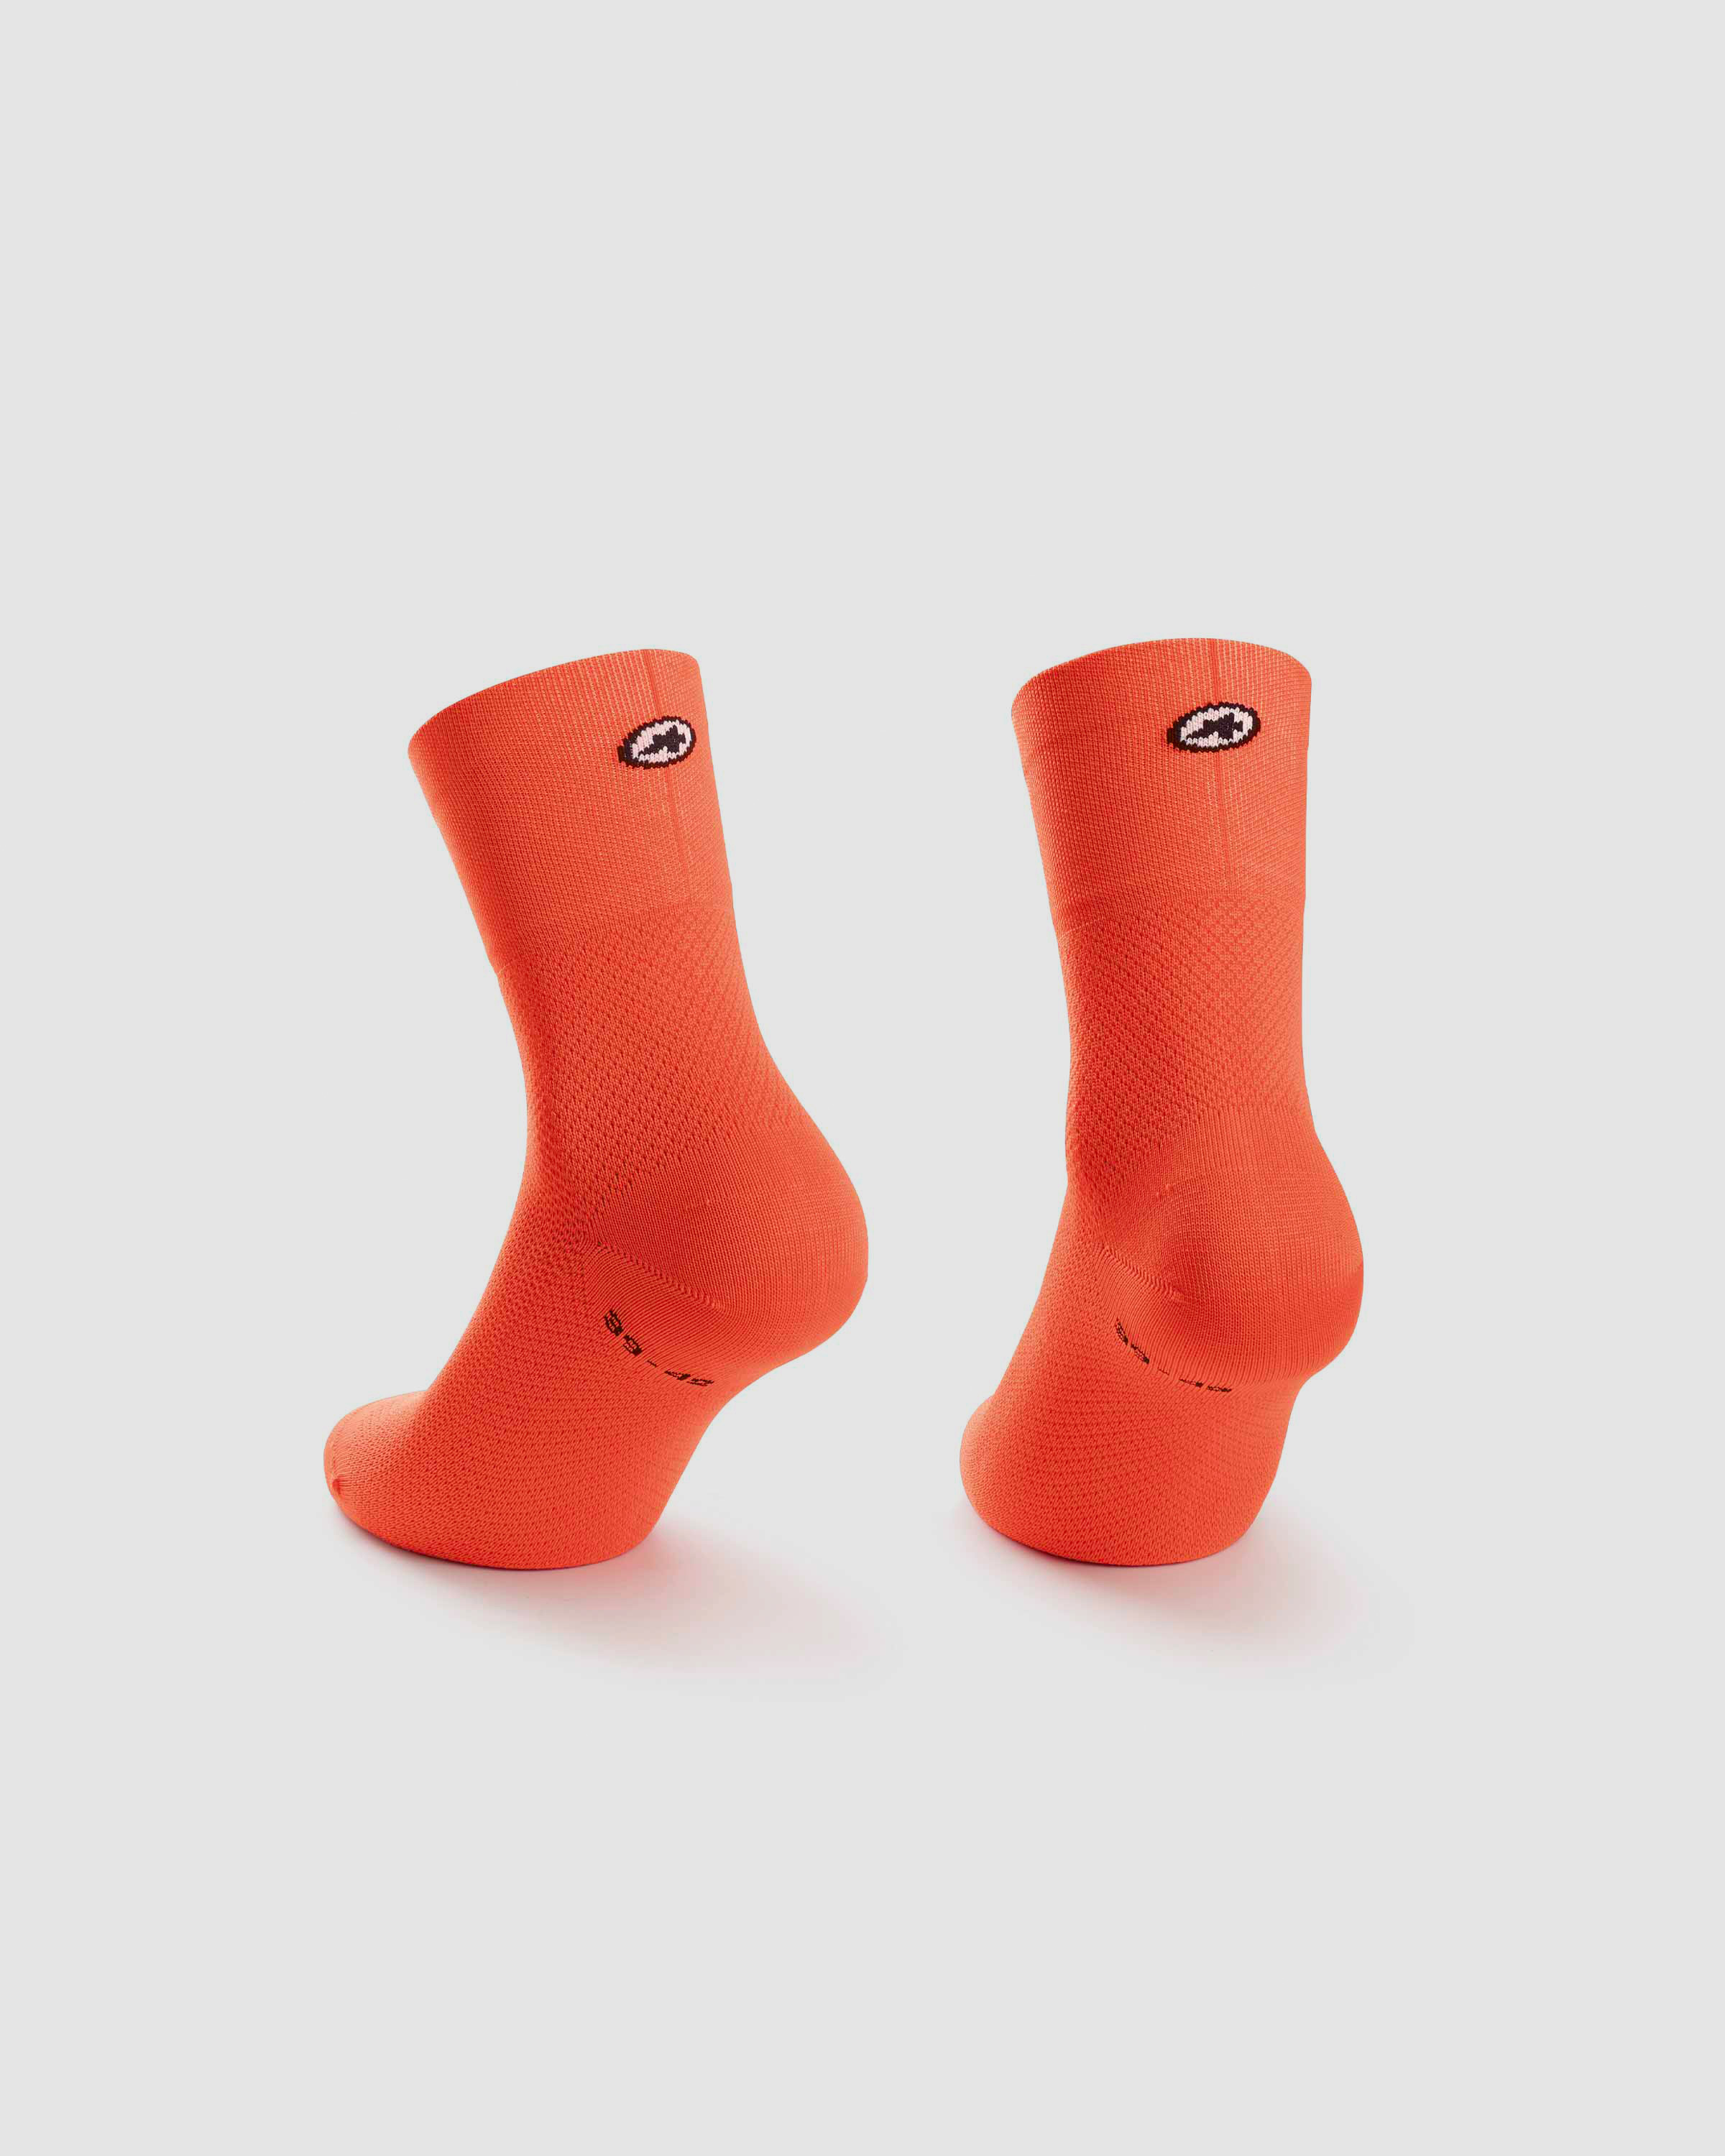 MILLE GT Socks - ASSOS Of Switzerland - Official Outlet